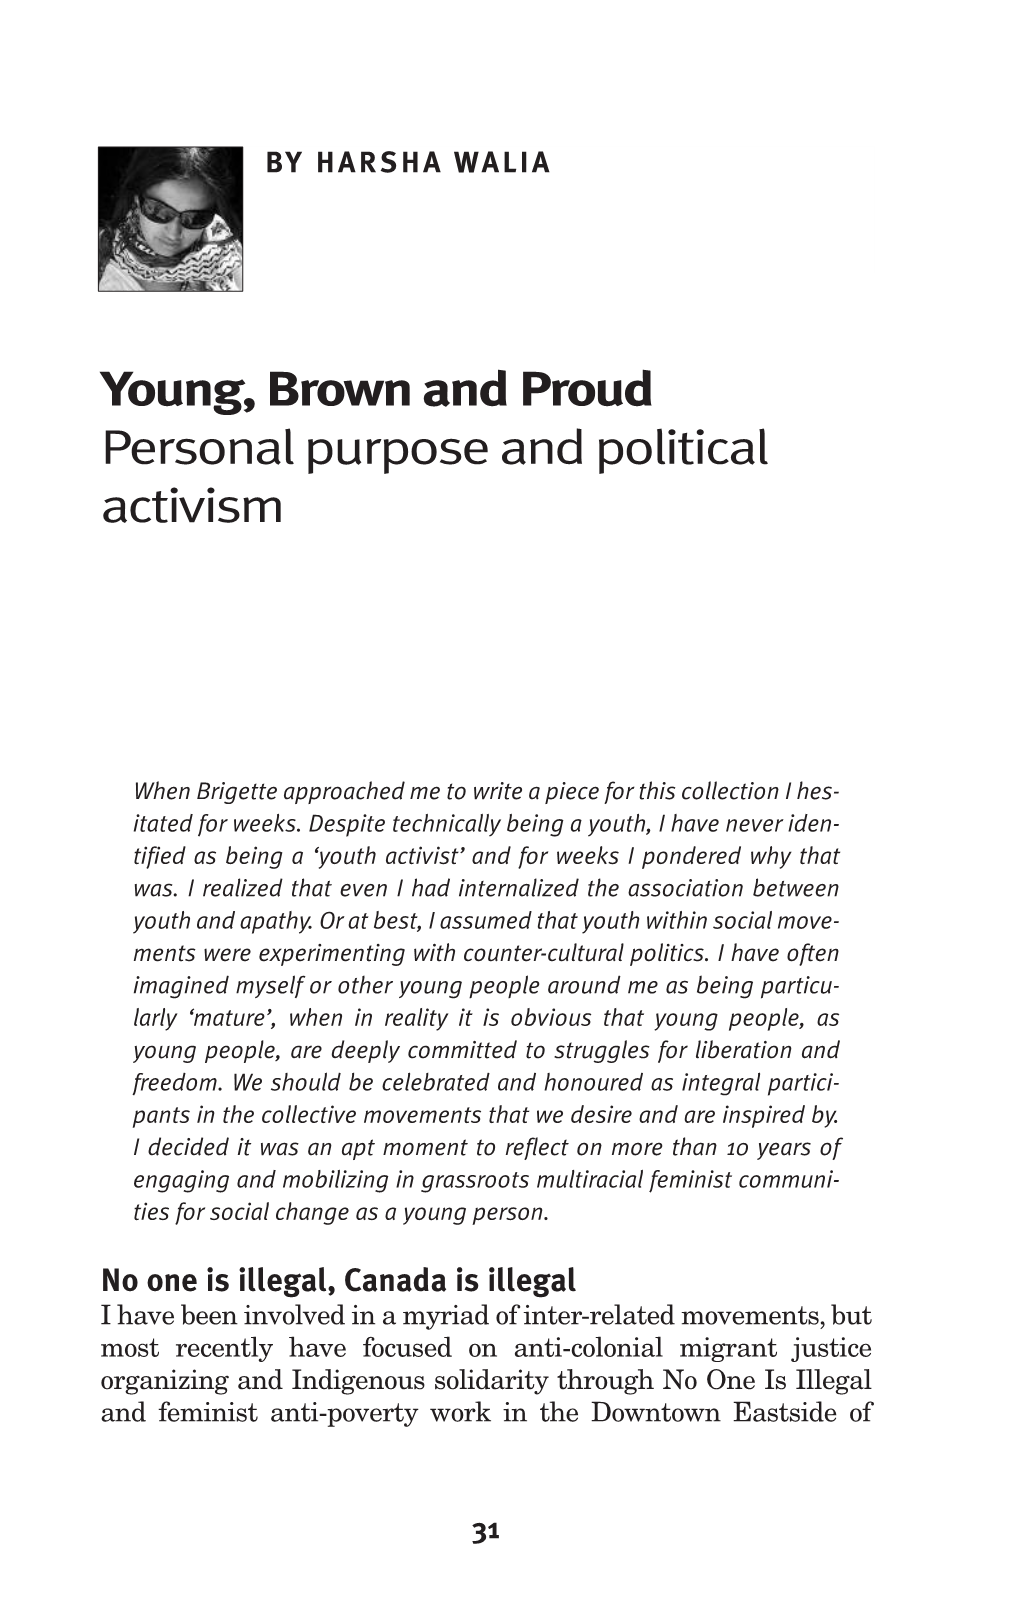 Young, Brown and Proud Personal Purpose and Political Activism